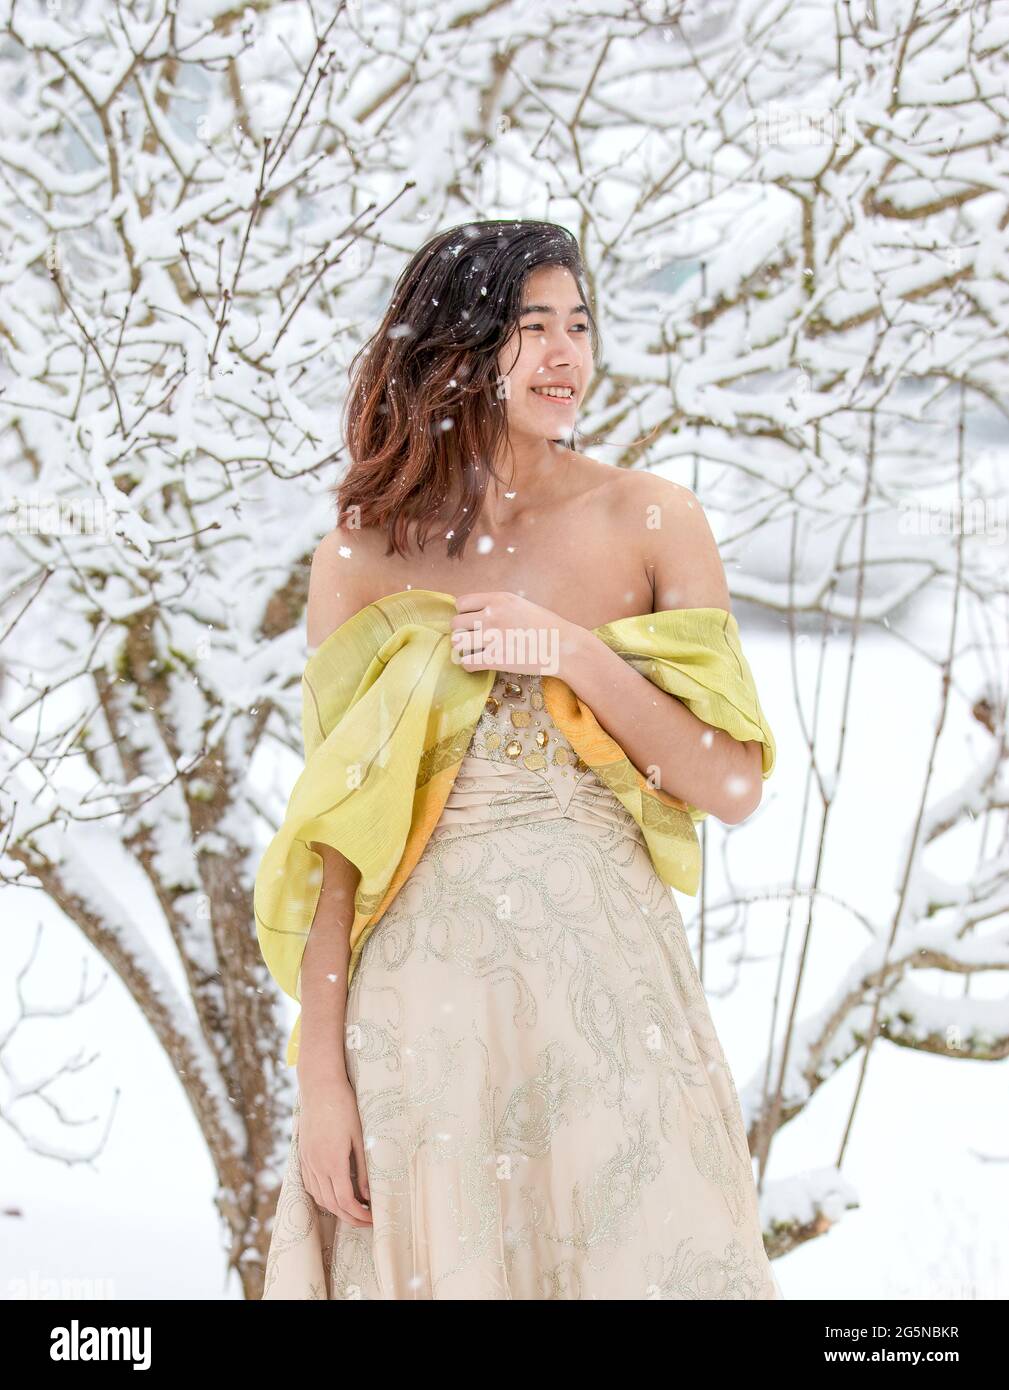 Biracial teen girl in formal gold colored dress and shawl outside on snowy day with snow covered tree branches in background Stock Photo